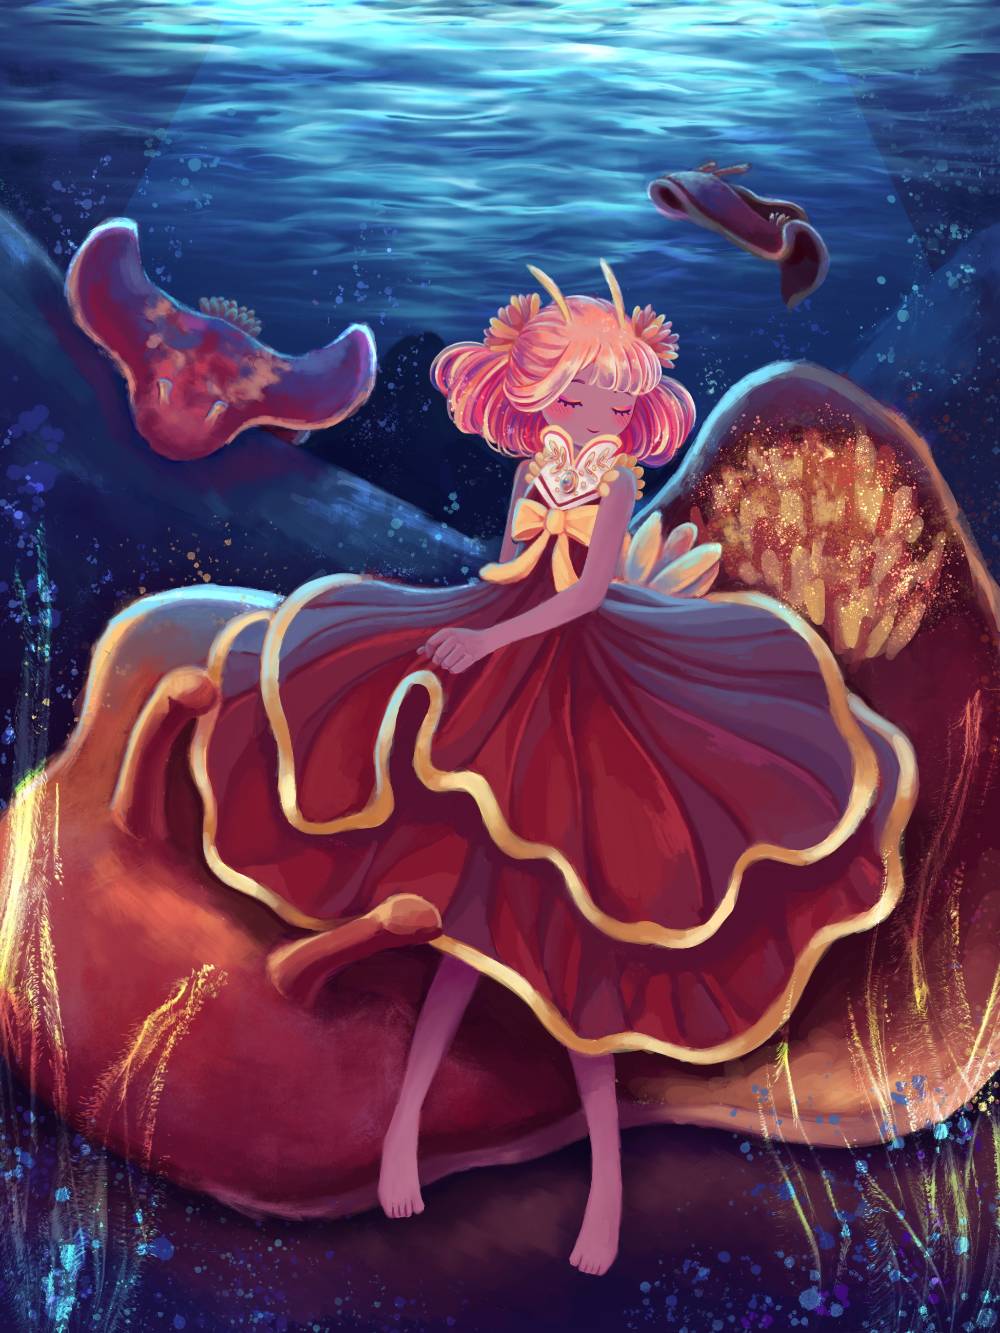 Character illustration in a underwater setting